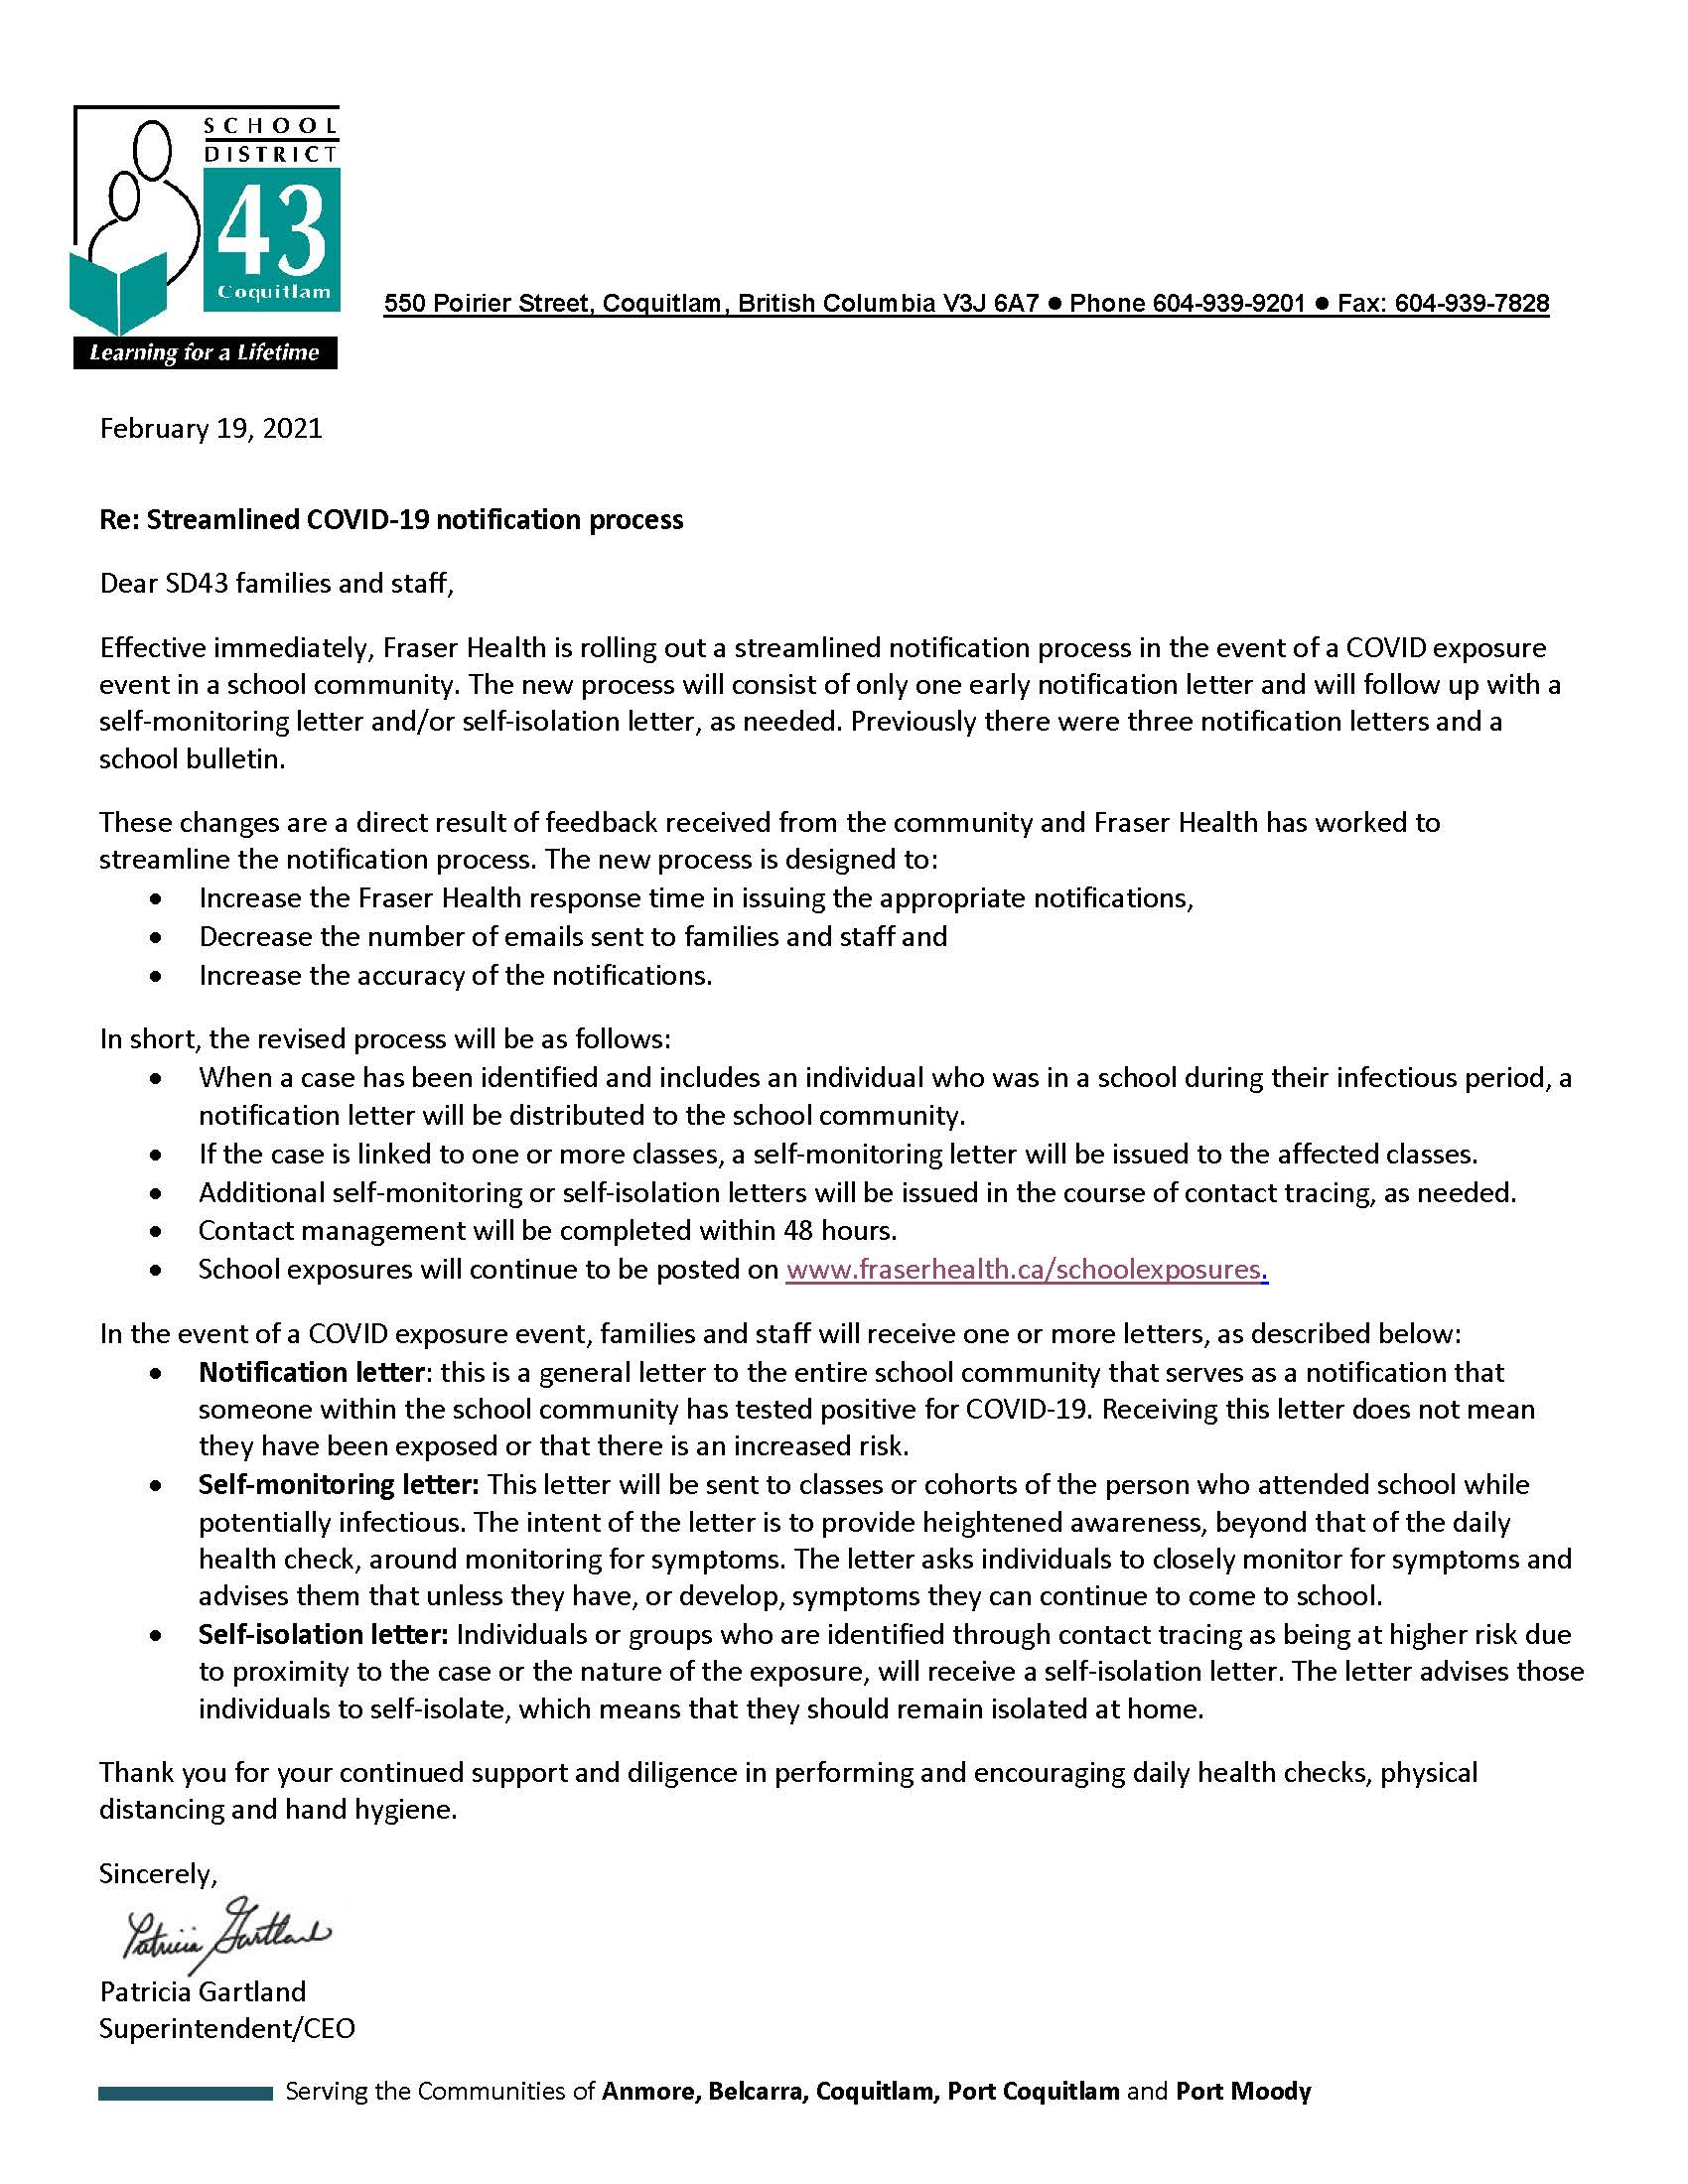 Superintendents letter to families-staff re streamlined COVID notifications 02-19-2021.jpg